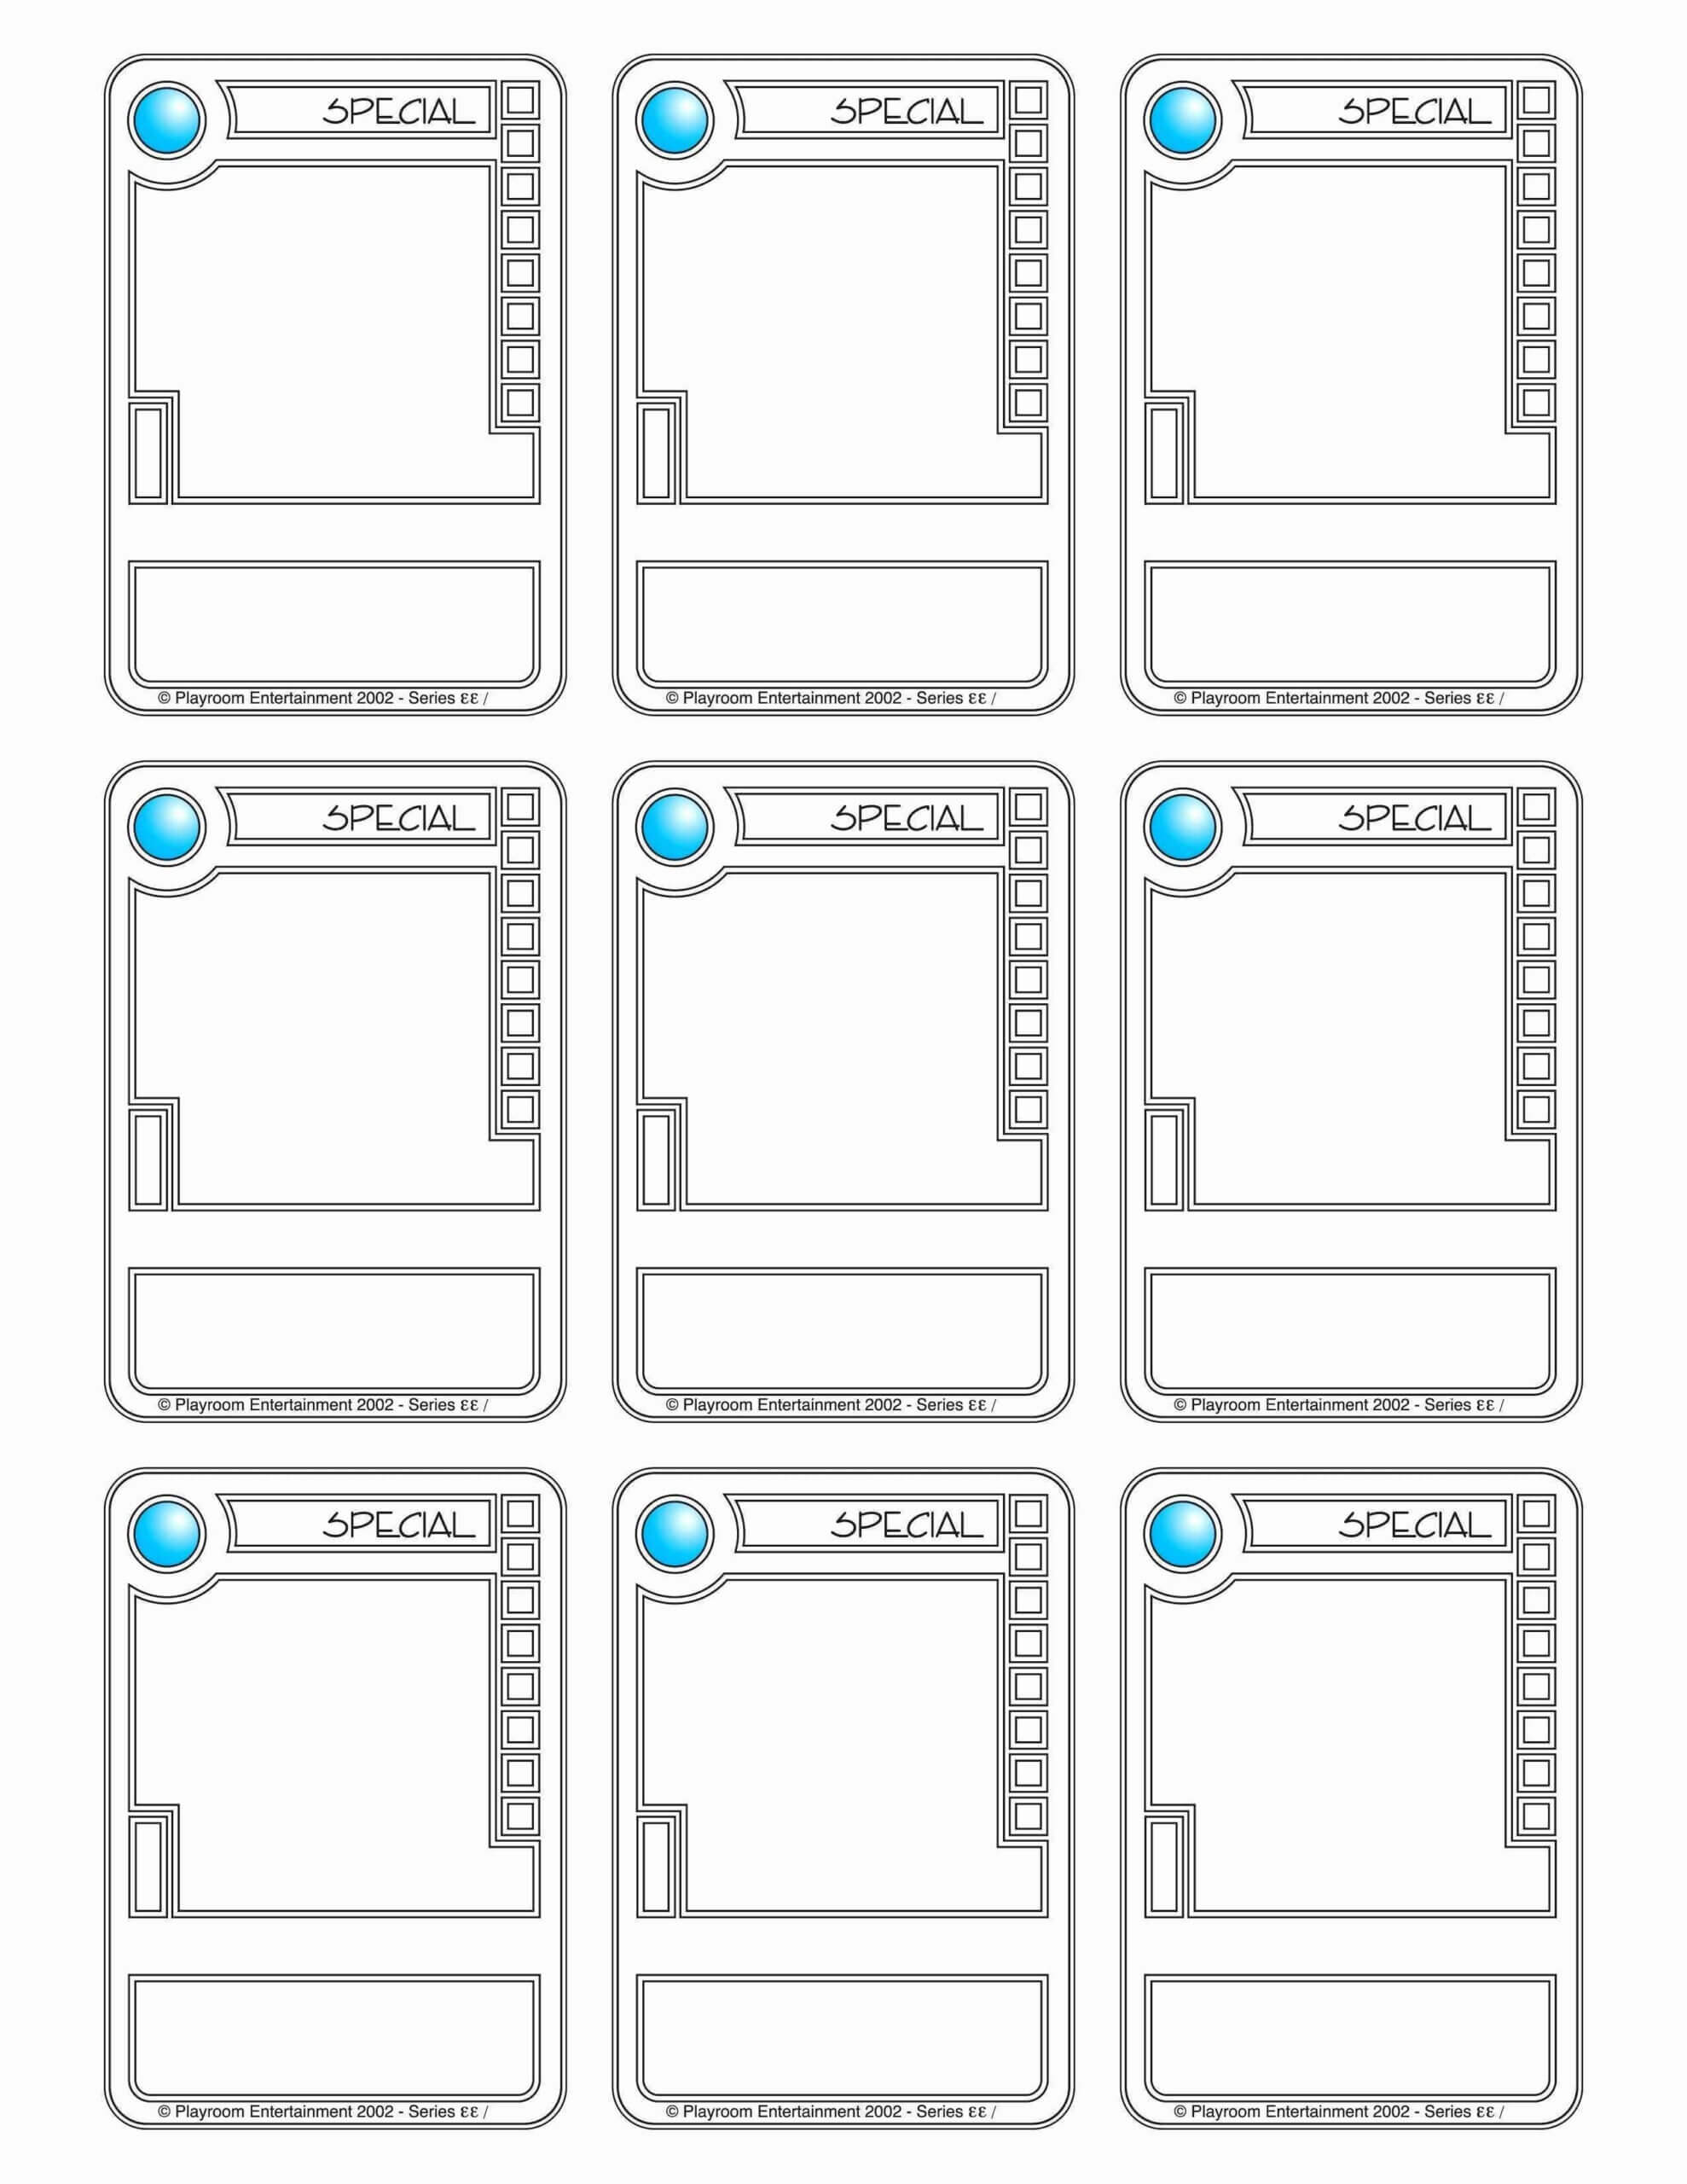 001 Trading Card Maker Free Examples Template For Success In Throughout Card Game Template Maker